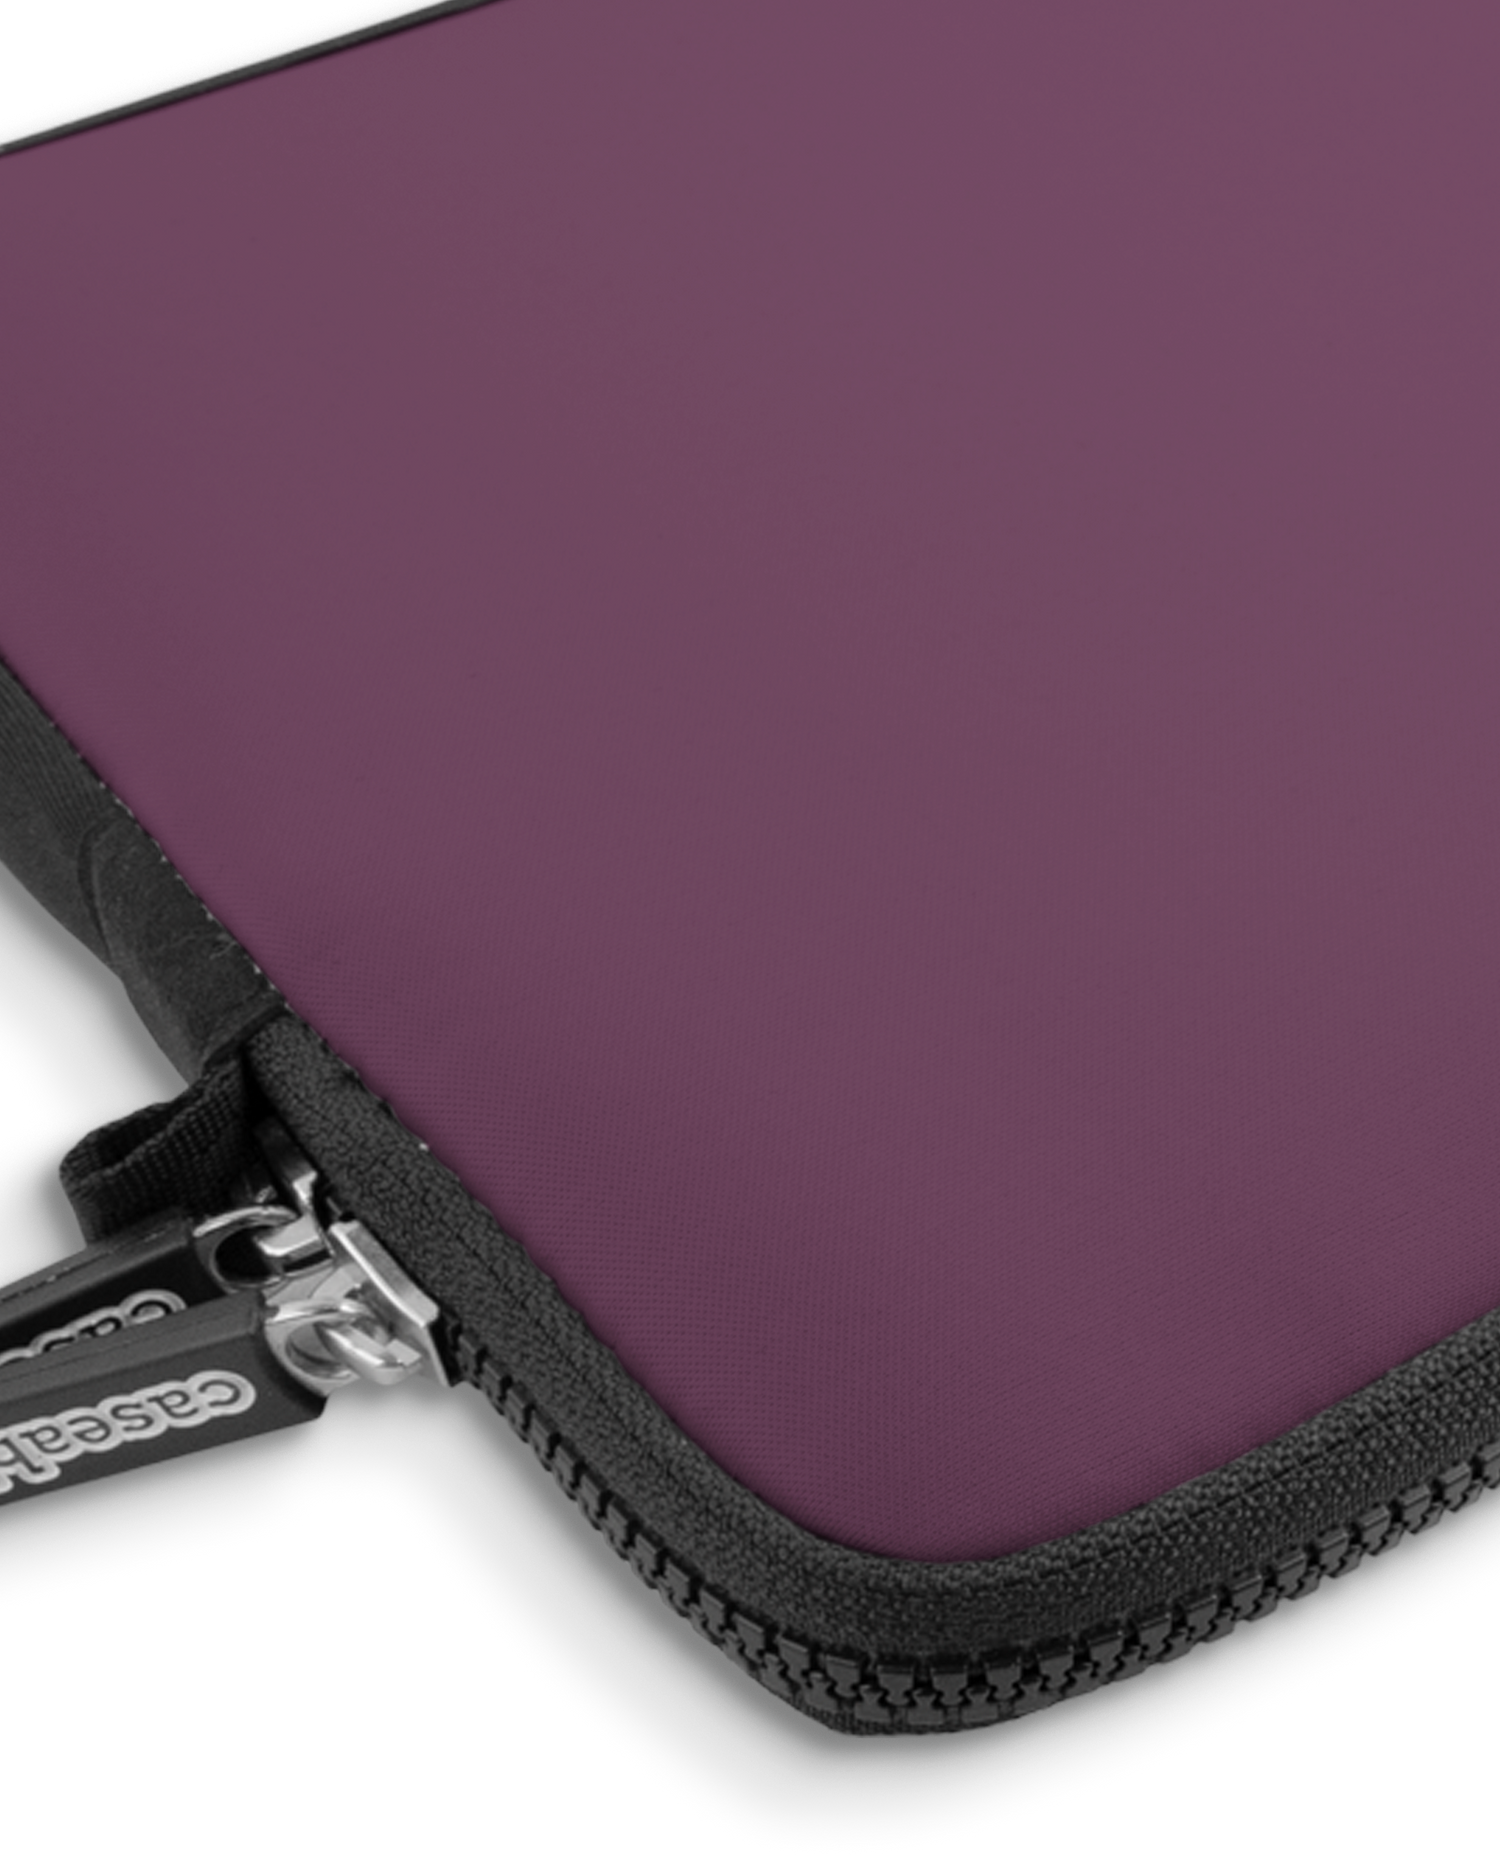 PLUM Premium Laptop Bag 13 inch with device inside